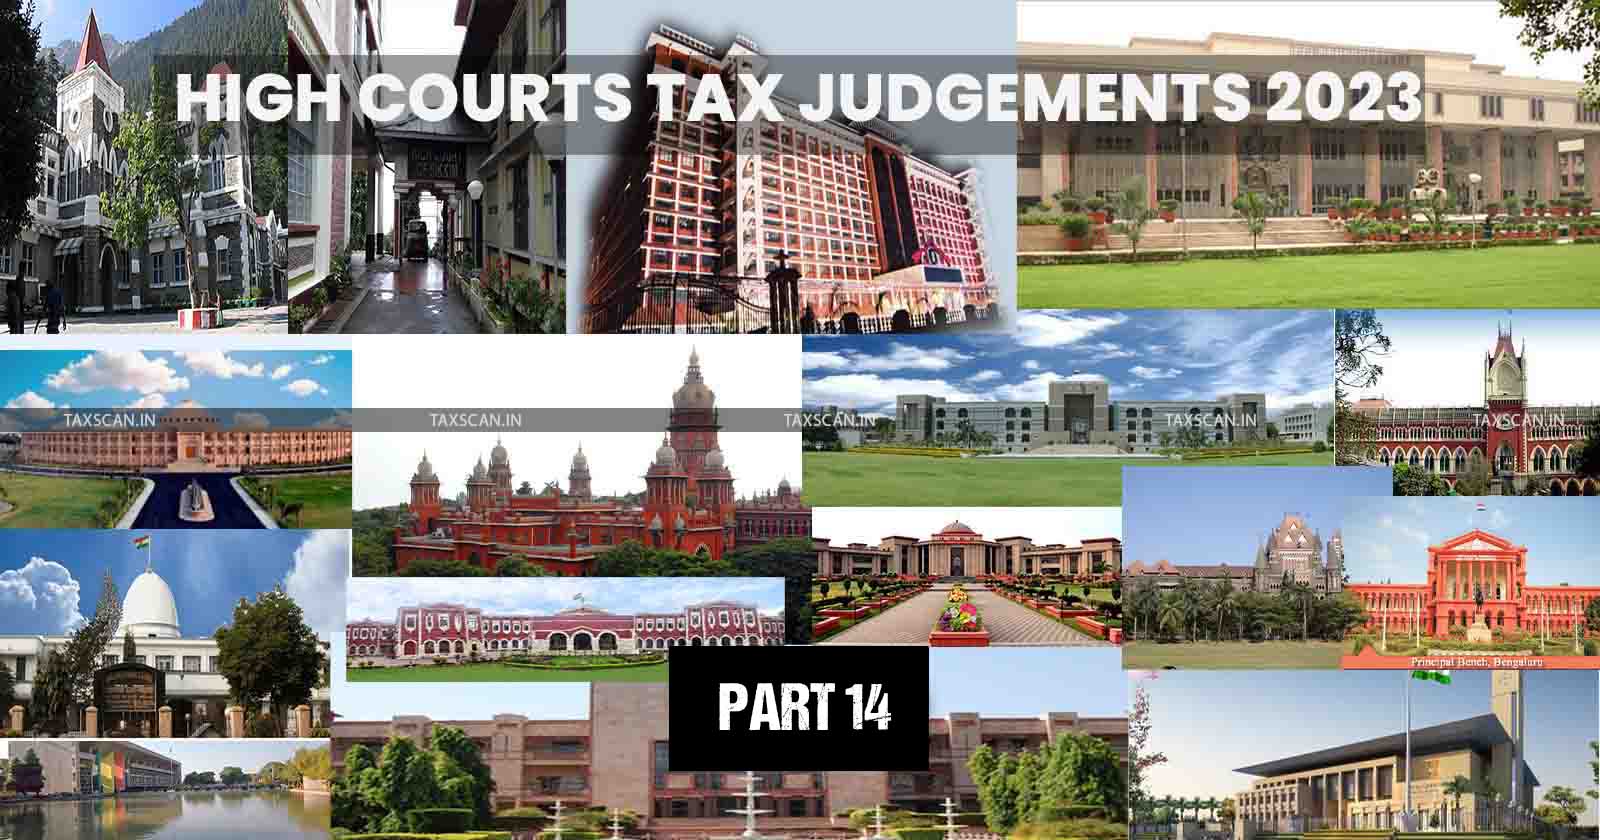 High Courts Annual Digest 2023 - Tax Judgment of High Courts - Annual Digest 2023 - High Courts Annual Digest - taxscan annual digest - Taxscan